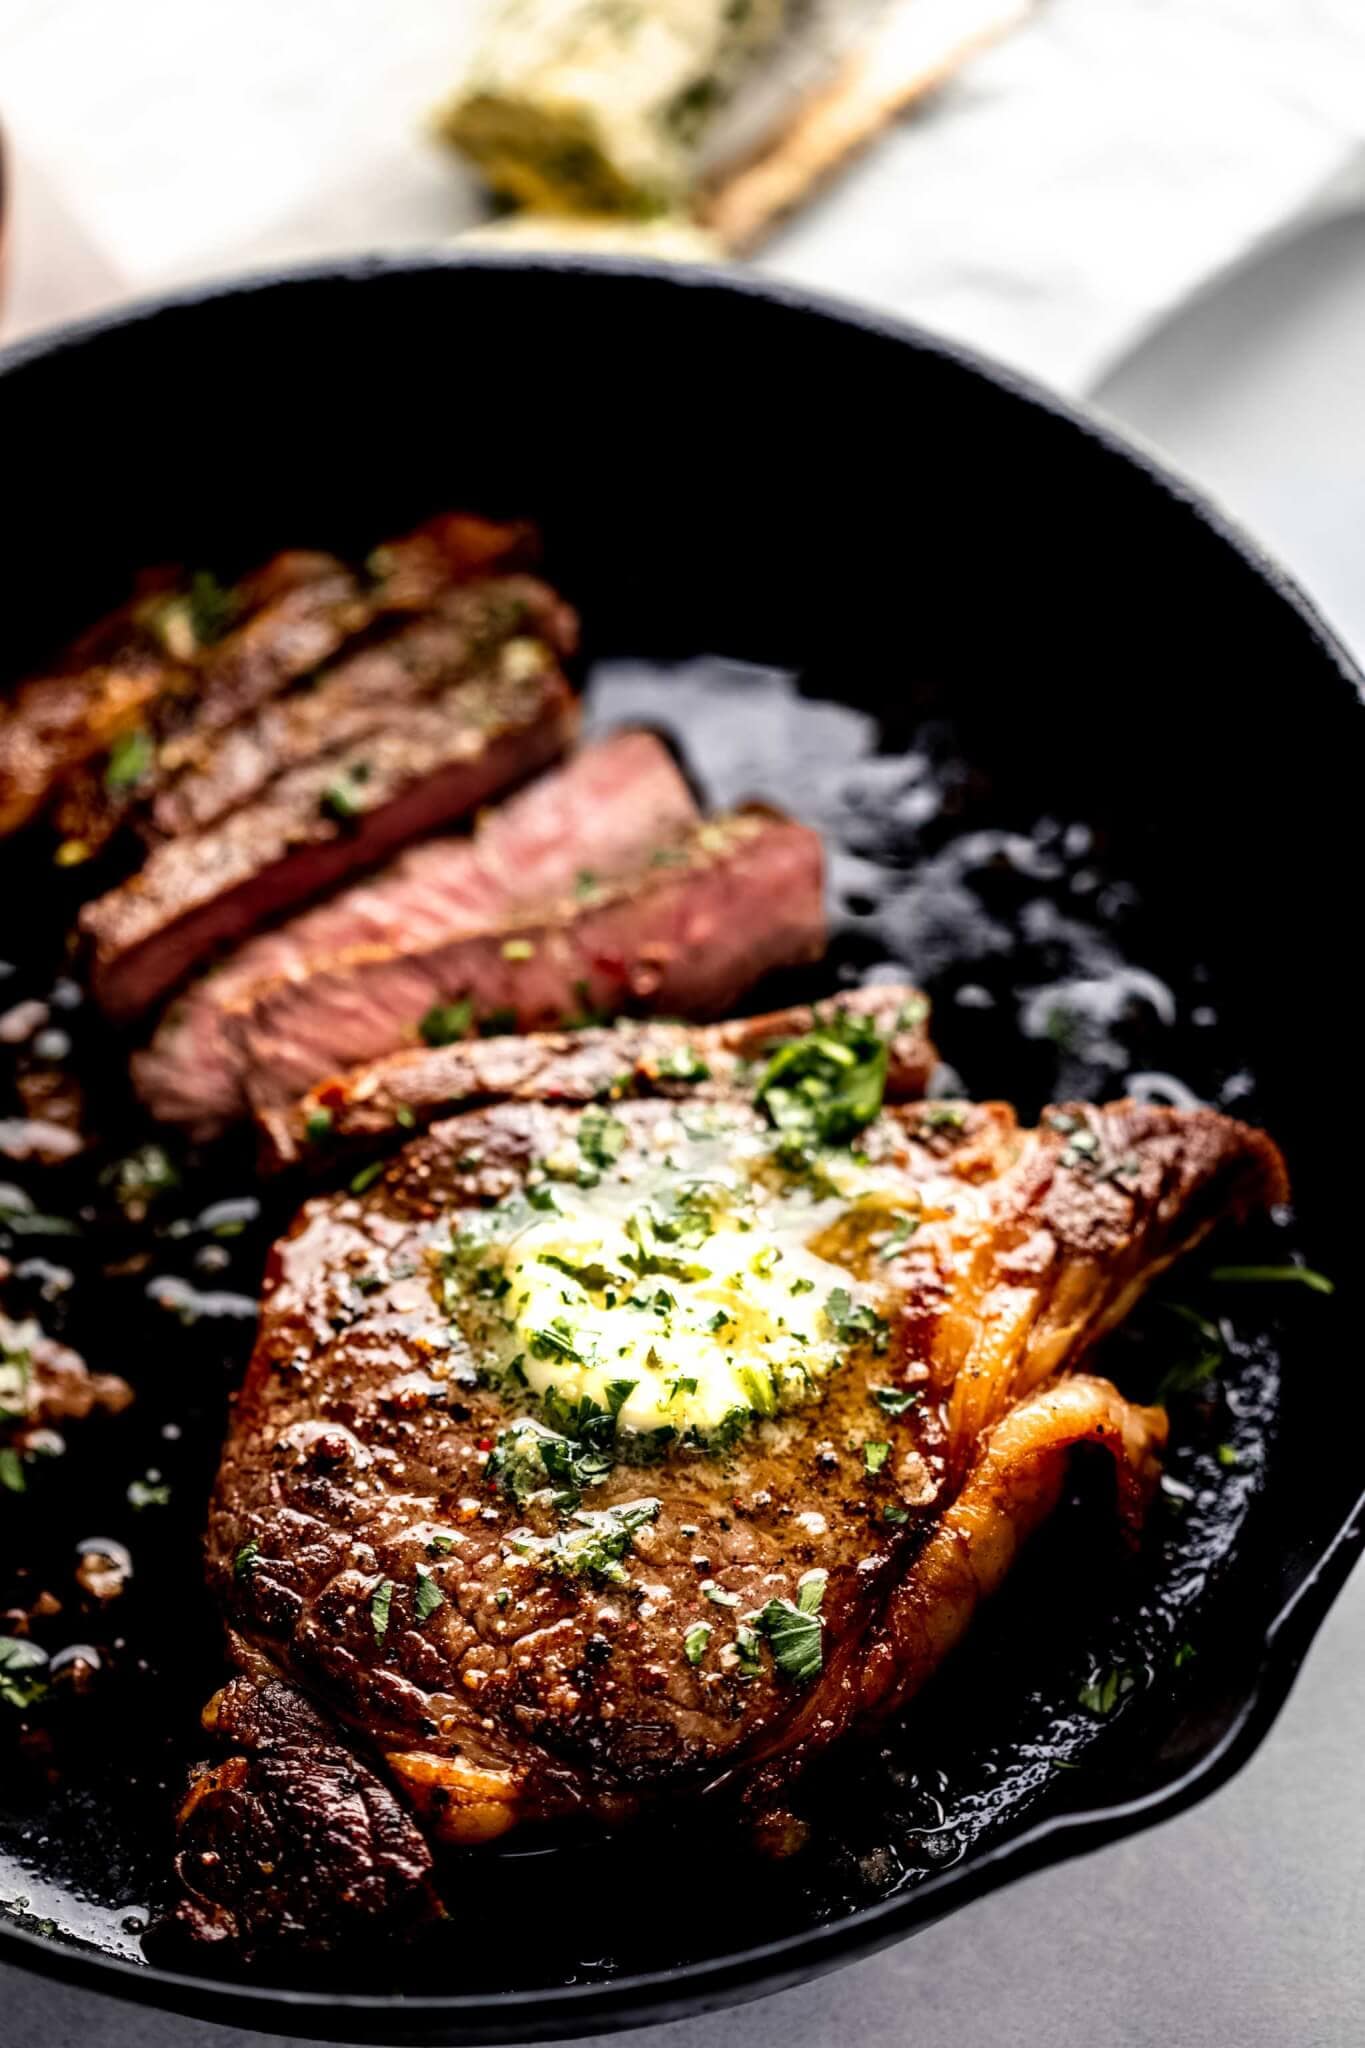 Seared ribeye in skillet sliced and topped with butter.